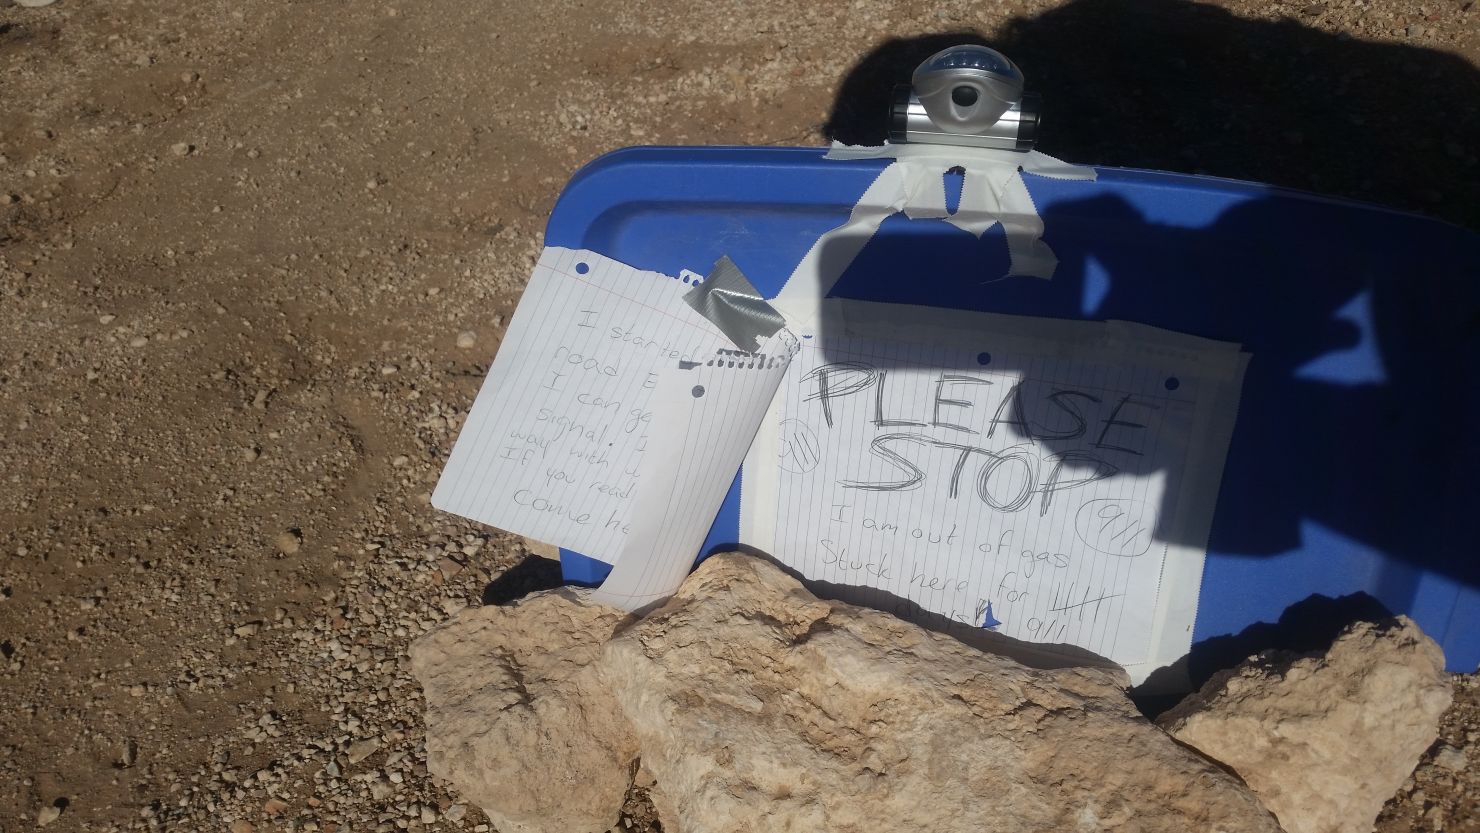  Amber VanHecke, 24, left a note that authorities used to find her in the Arizona wilderness.